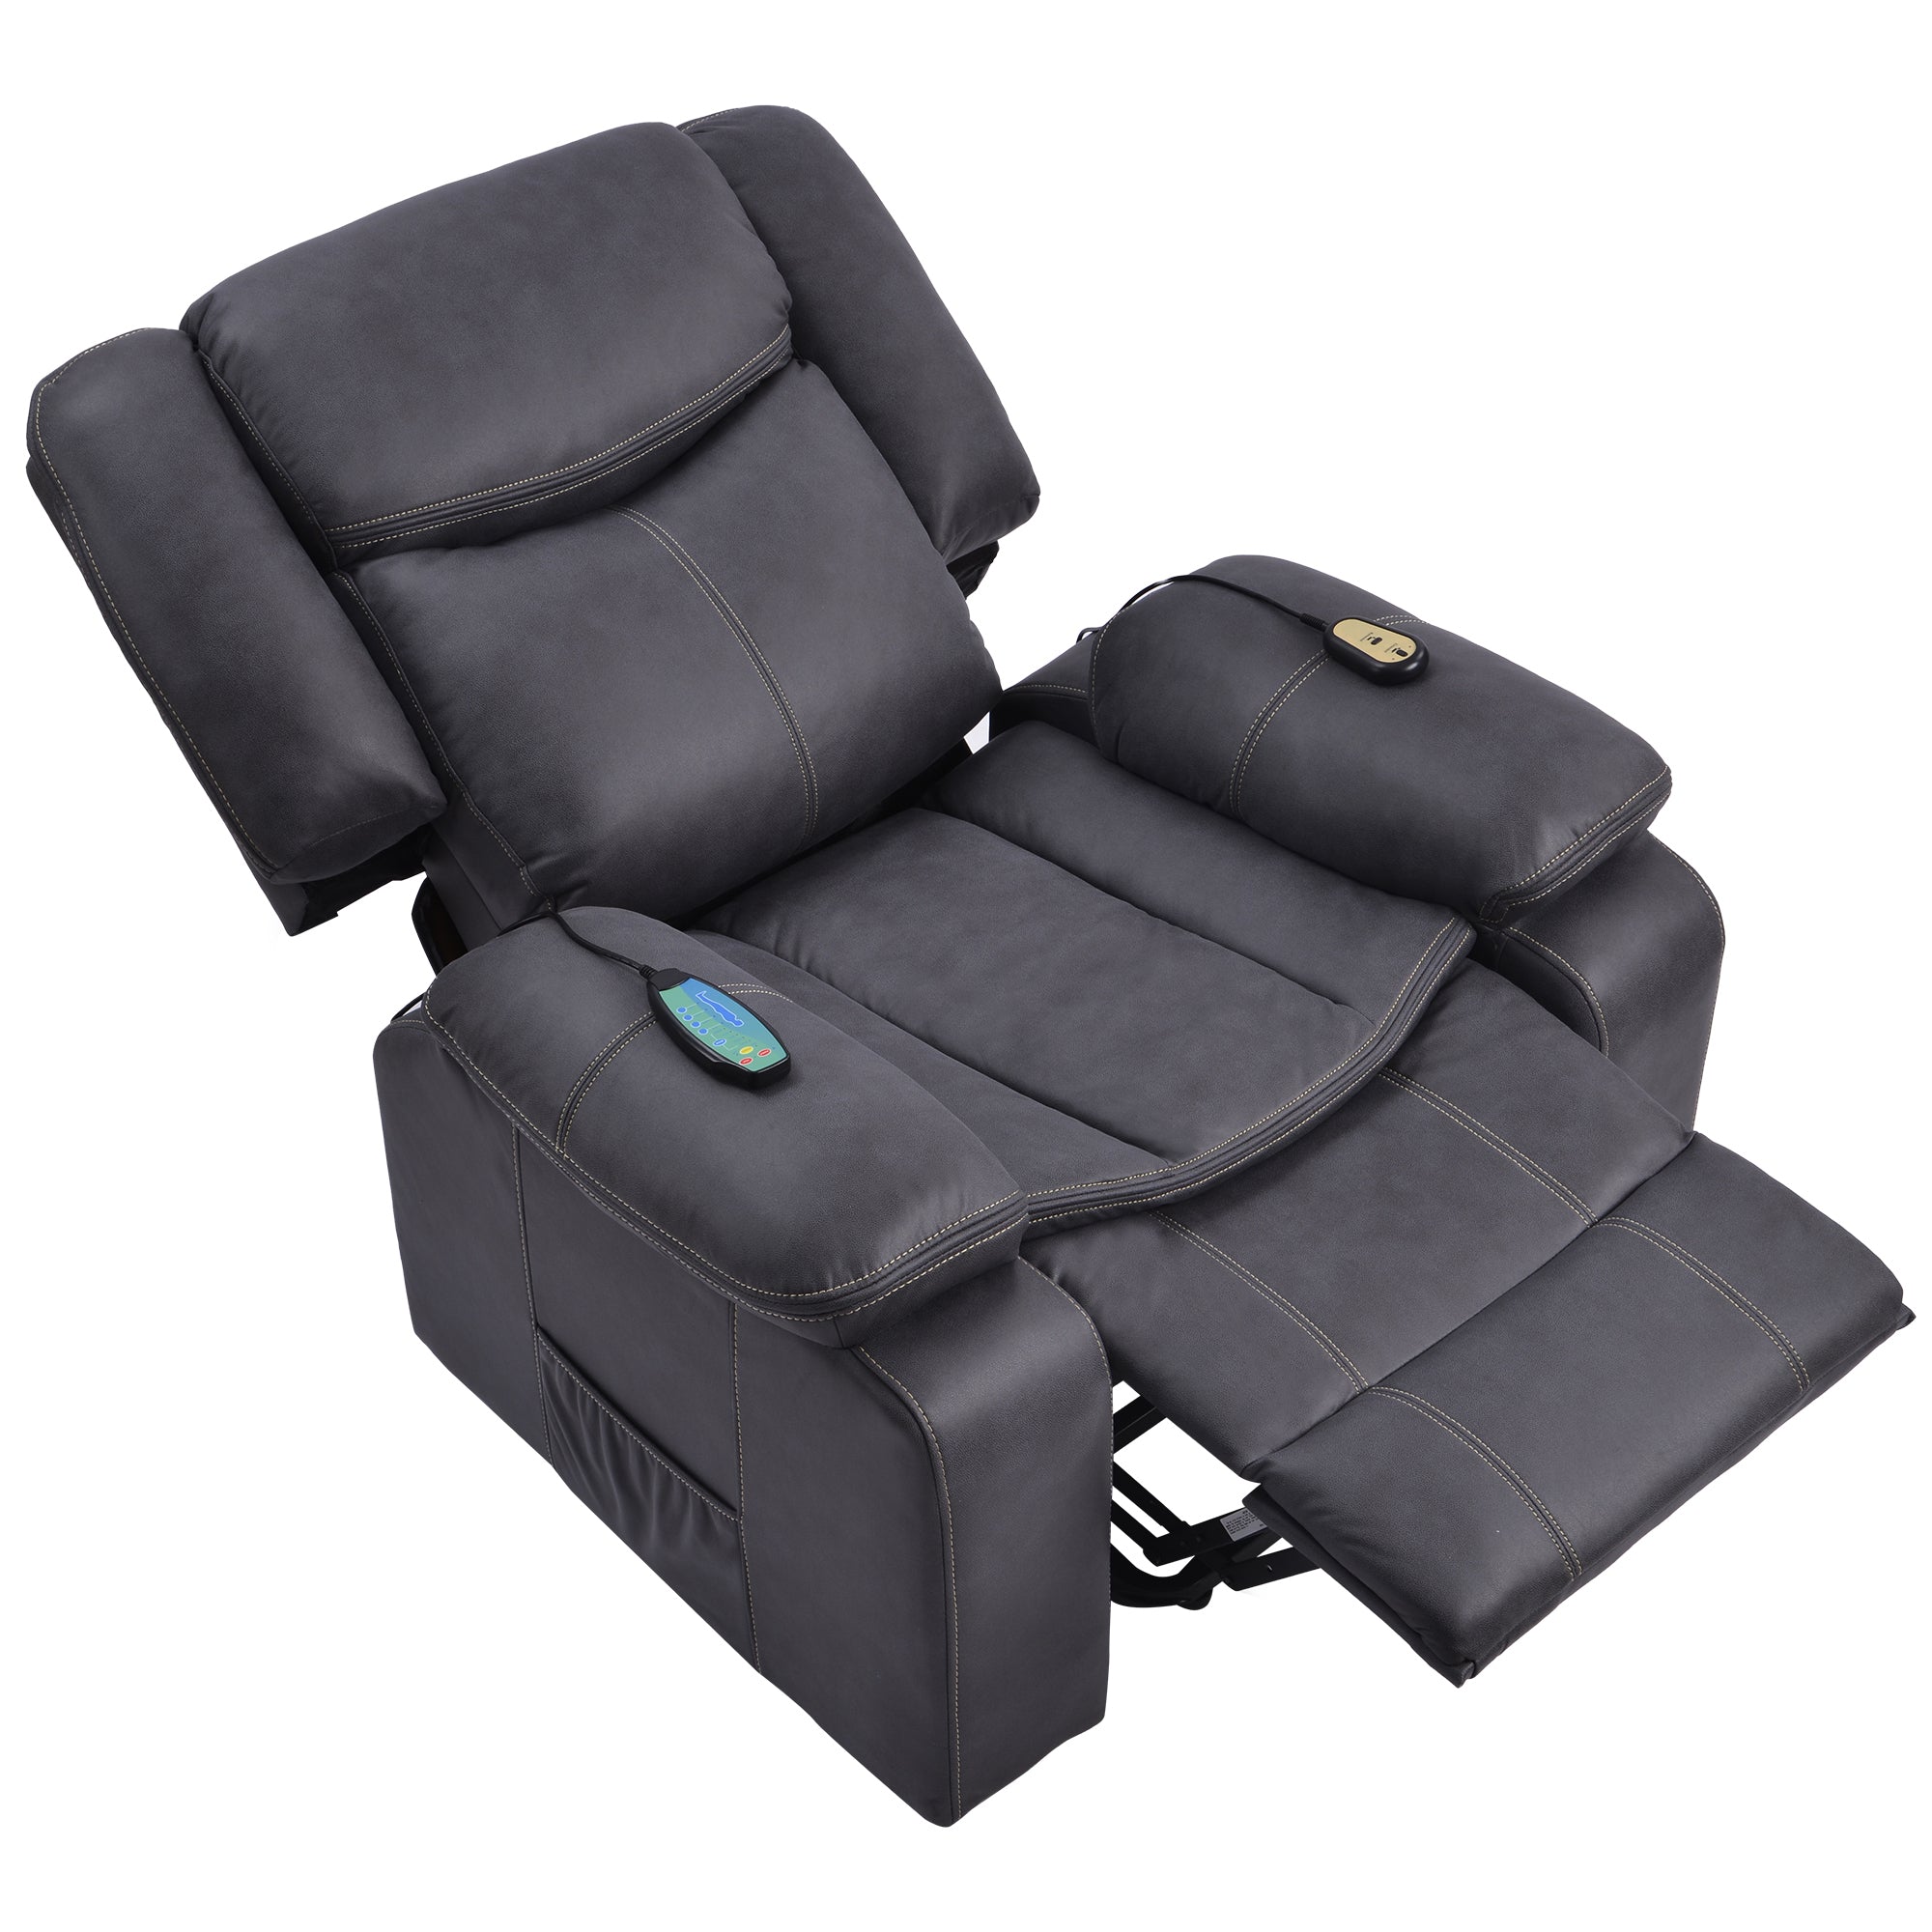 Power Lift Recliner Chair with Heat and Massage, fully reclined